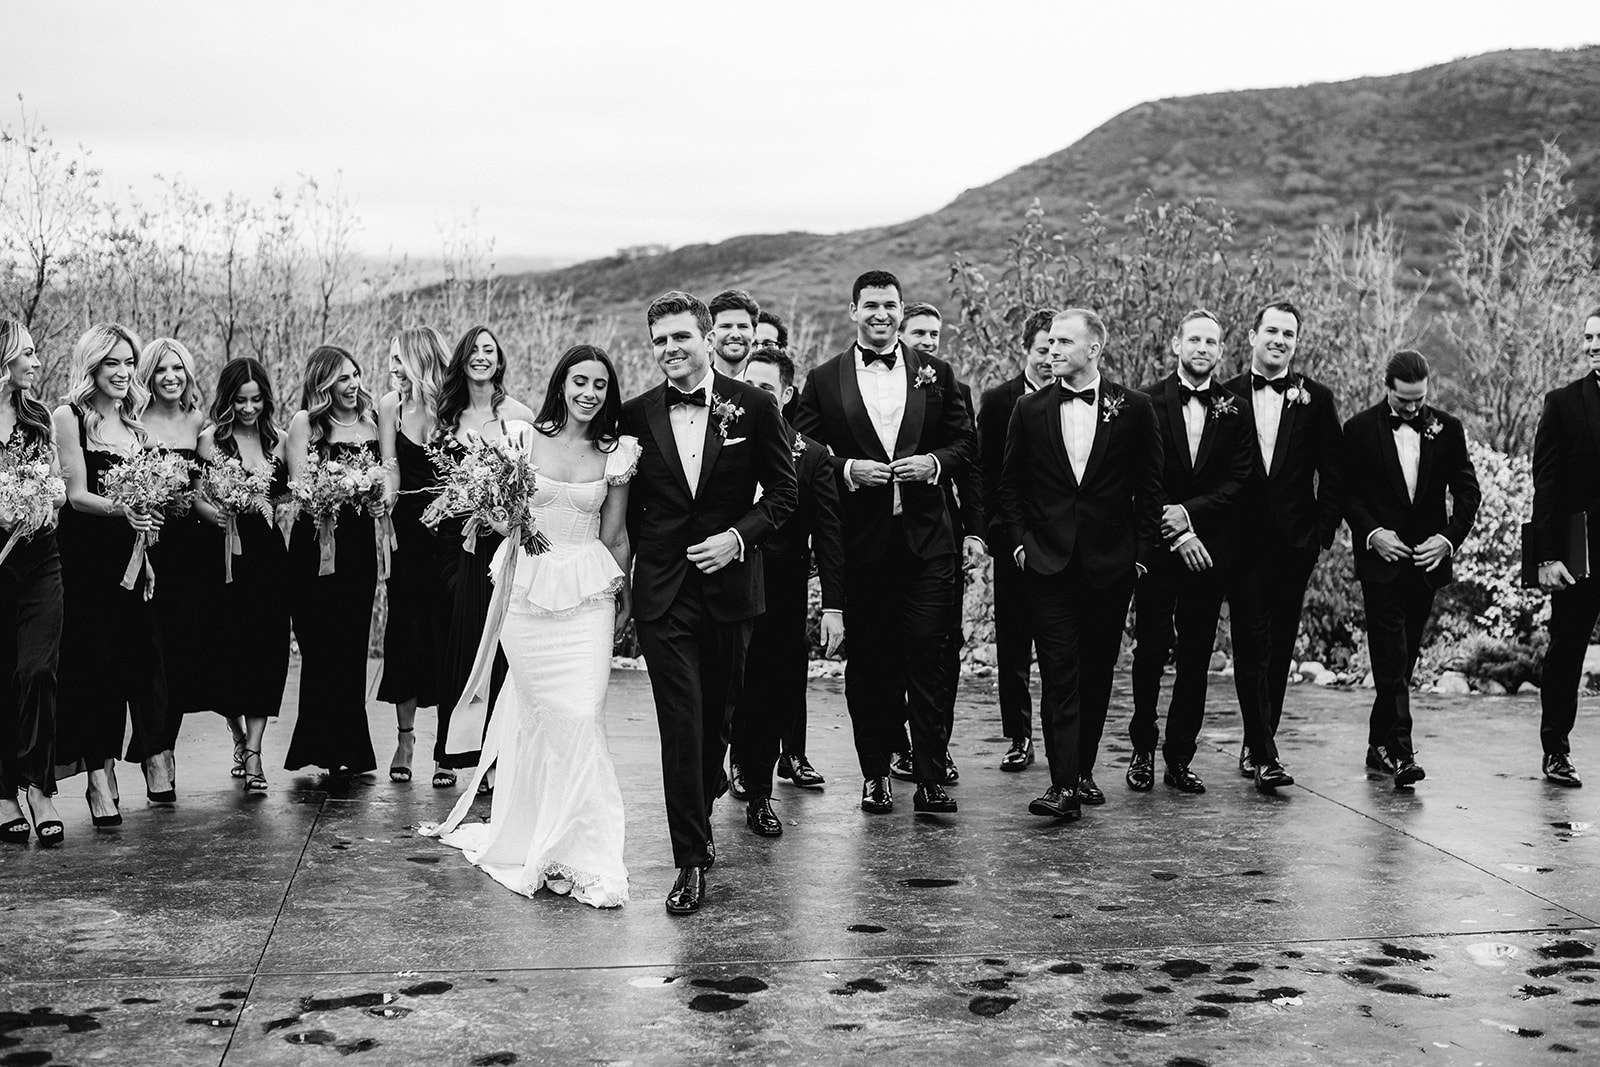 outdoor bridal party photos at a vintage inspired blue sky ranch wedding in utah. black mismatched bridesmaids dresses and black groomsmen tuxedos. photo by megan robinson photography